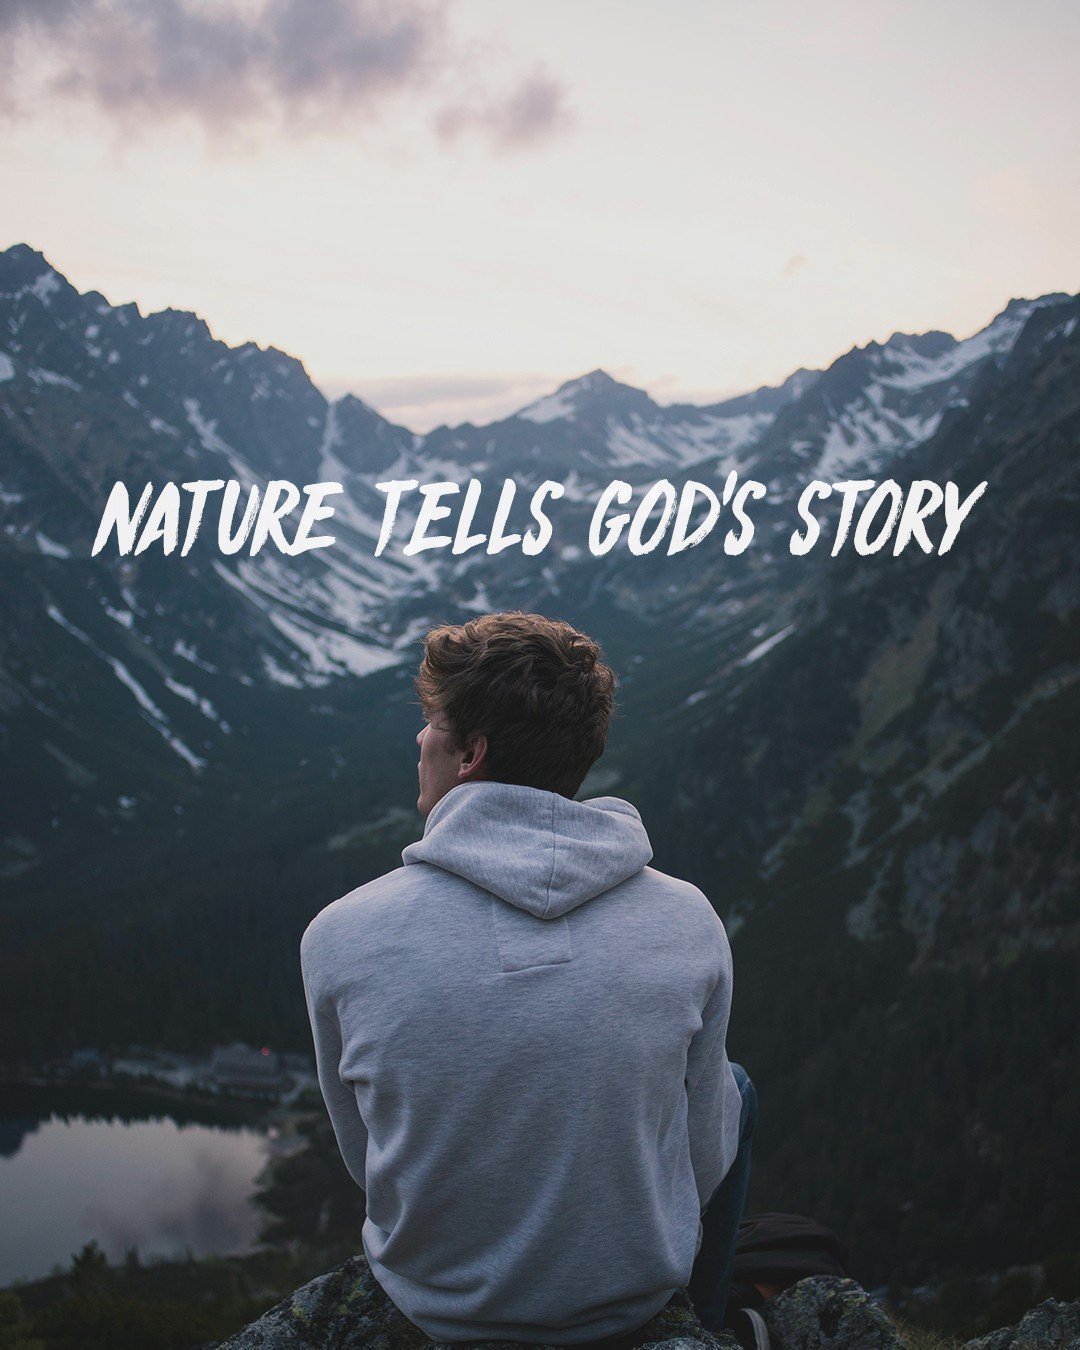 I&rsquo;m always on the lookout for resources that expand my view of God in biblical ways. I was impressed when I found some liturgical meditations from Fuller Studio. They&rsquo;re a series of short videos (under 5 minutes) that use nature and calmi